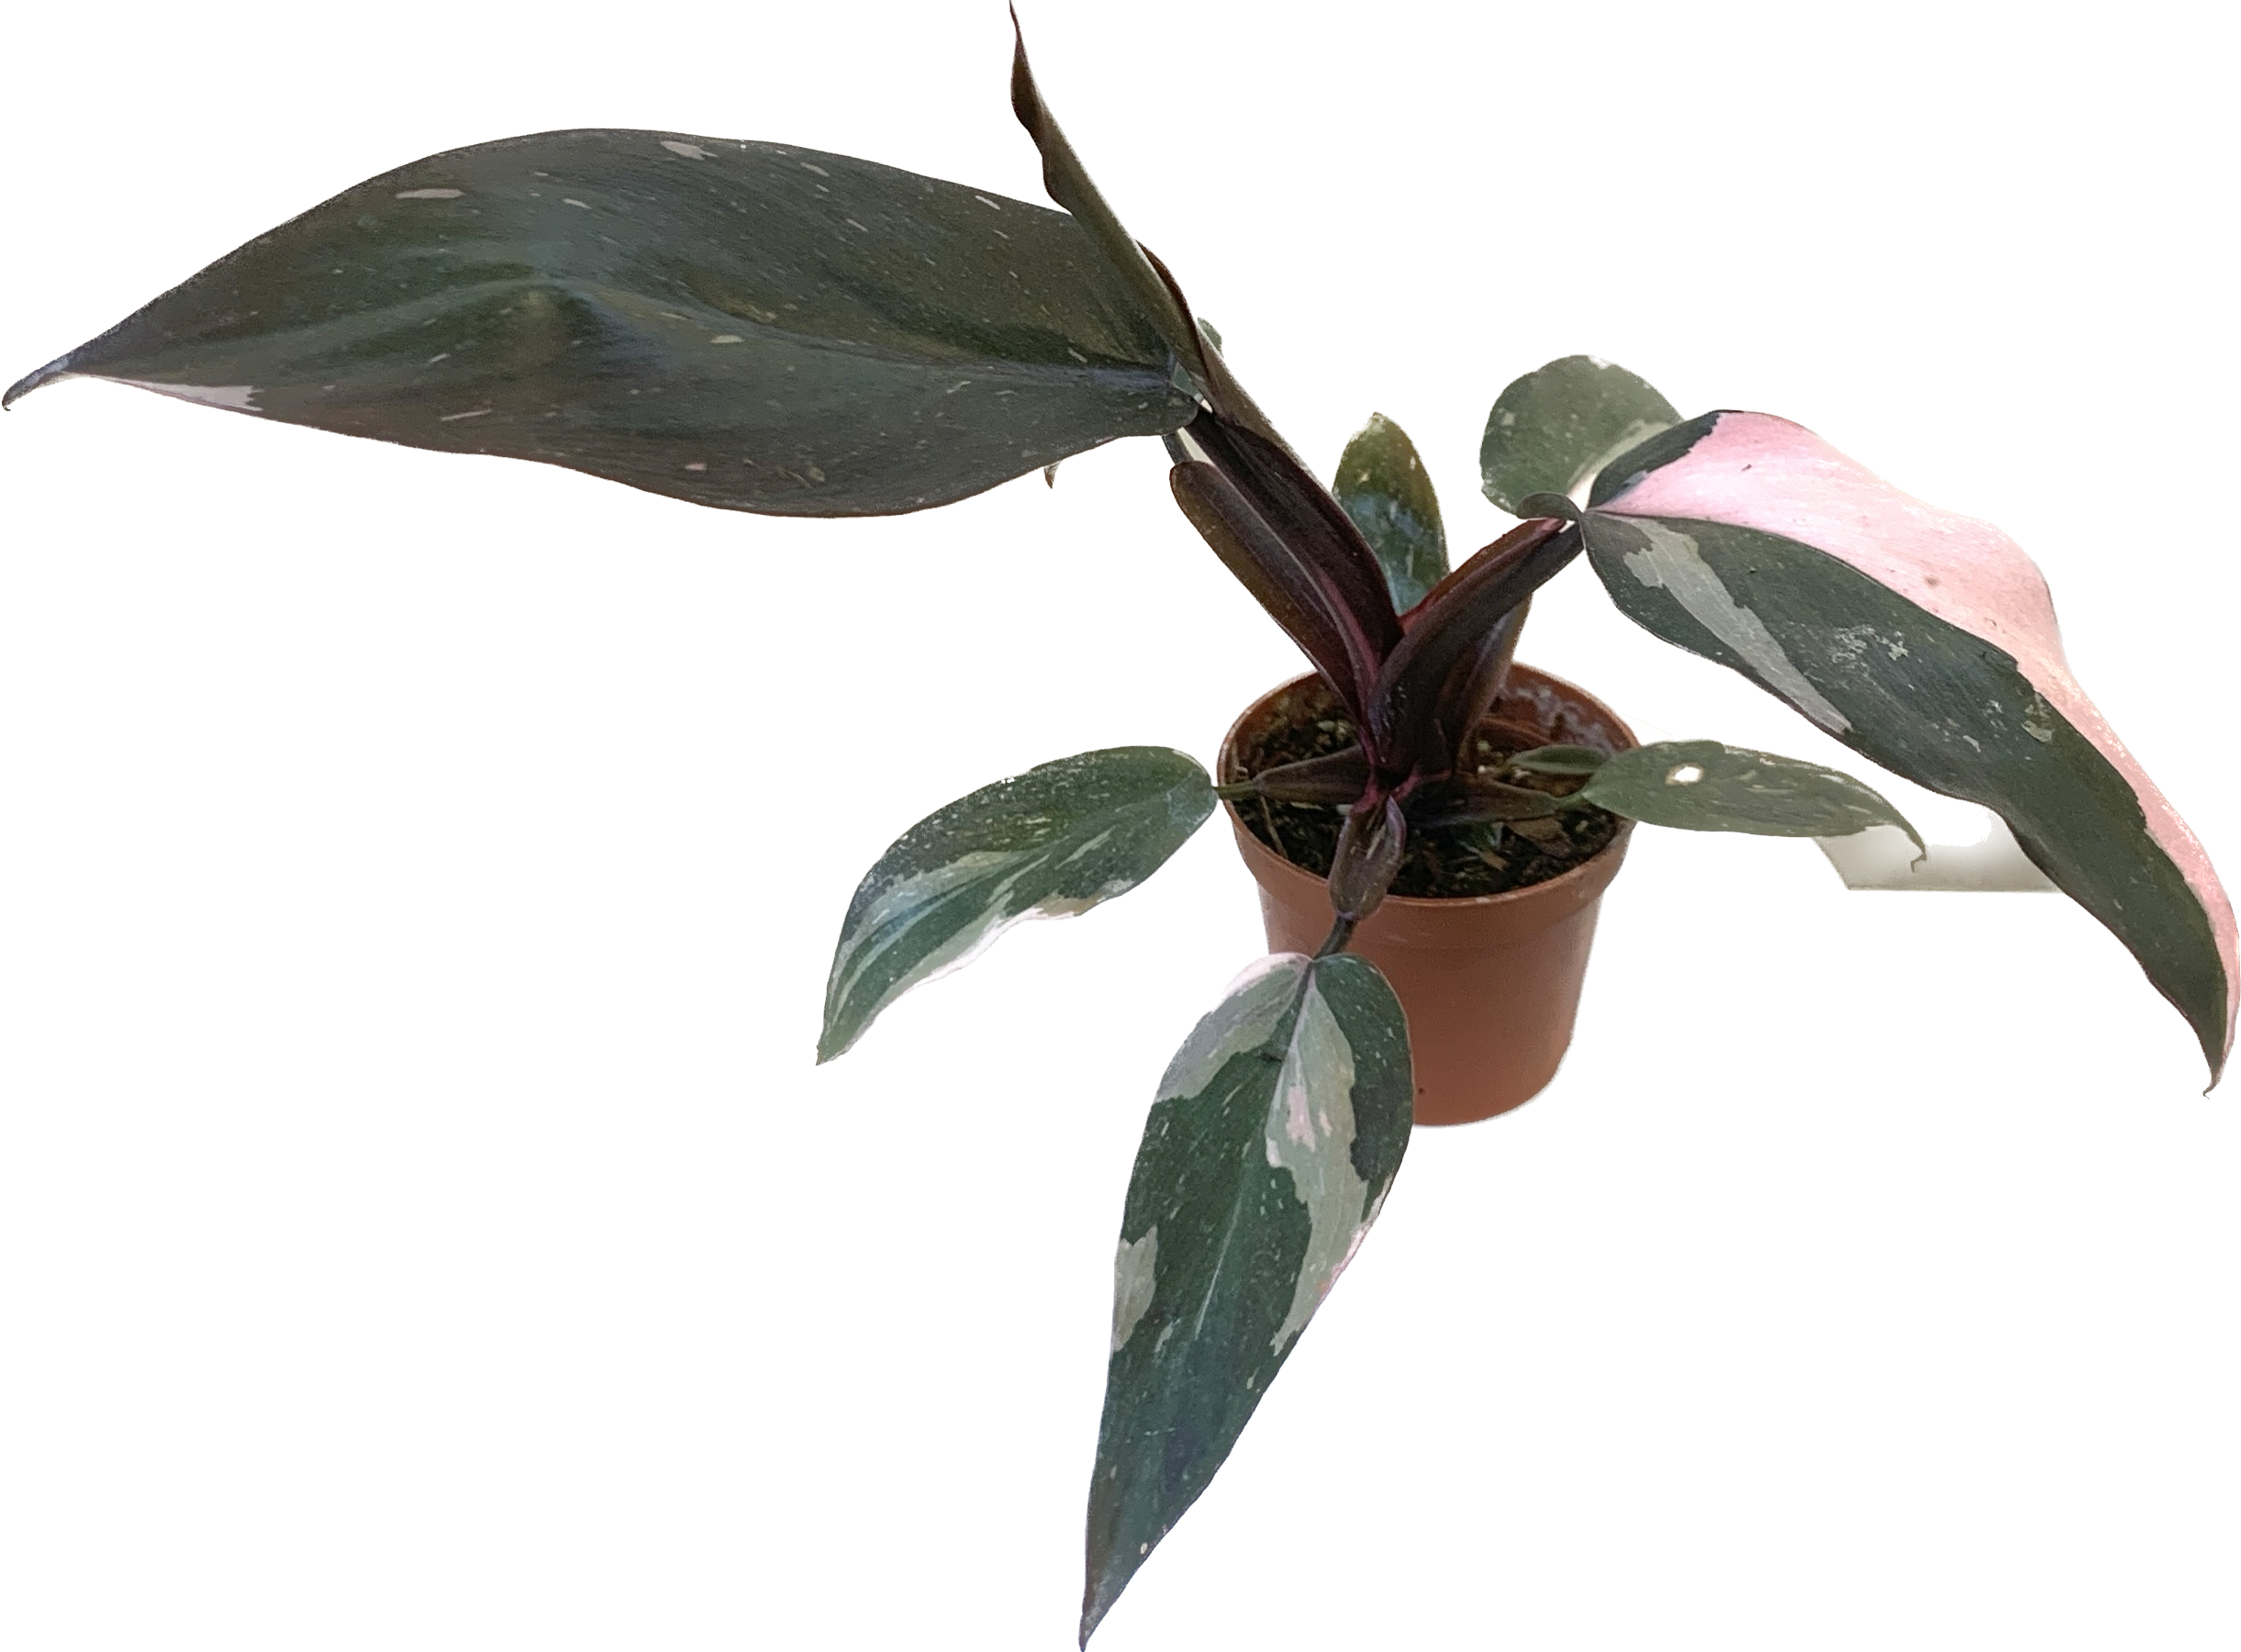 Philodendron Pink Princess, Philodendron Erubescens